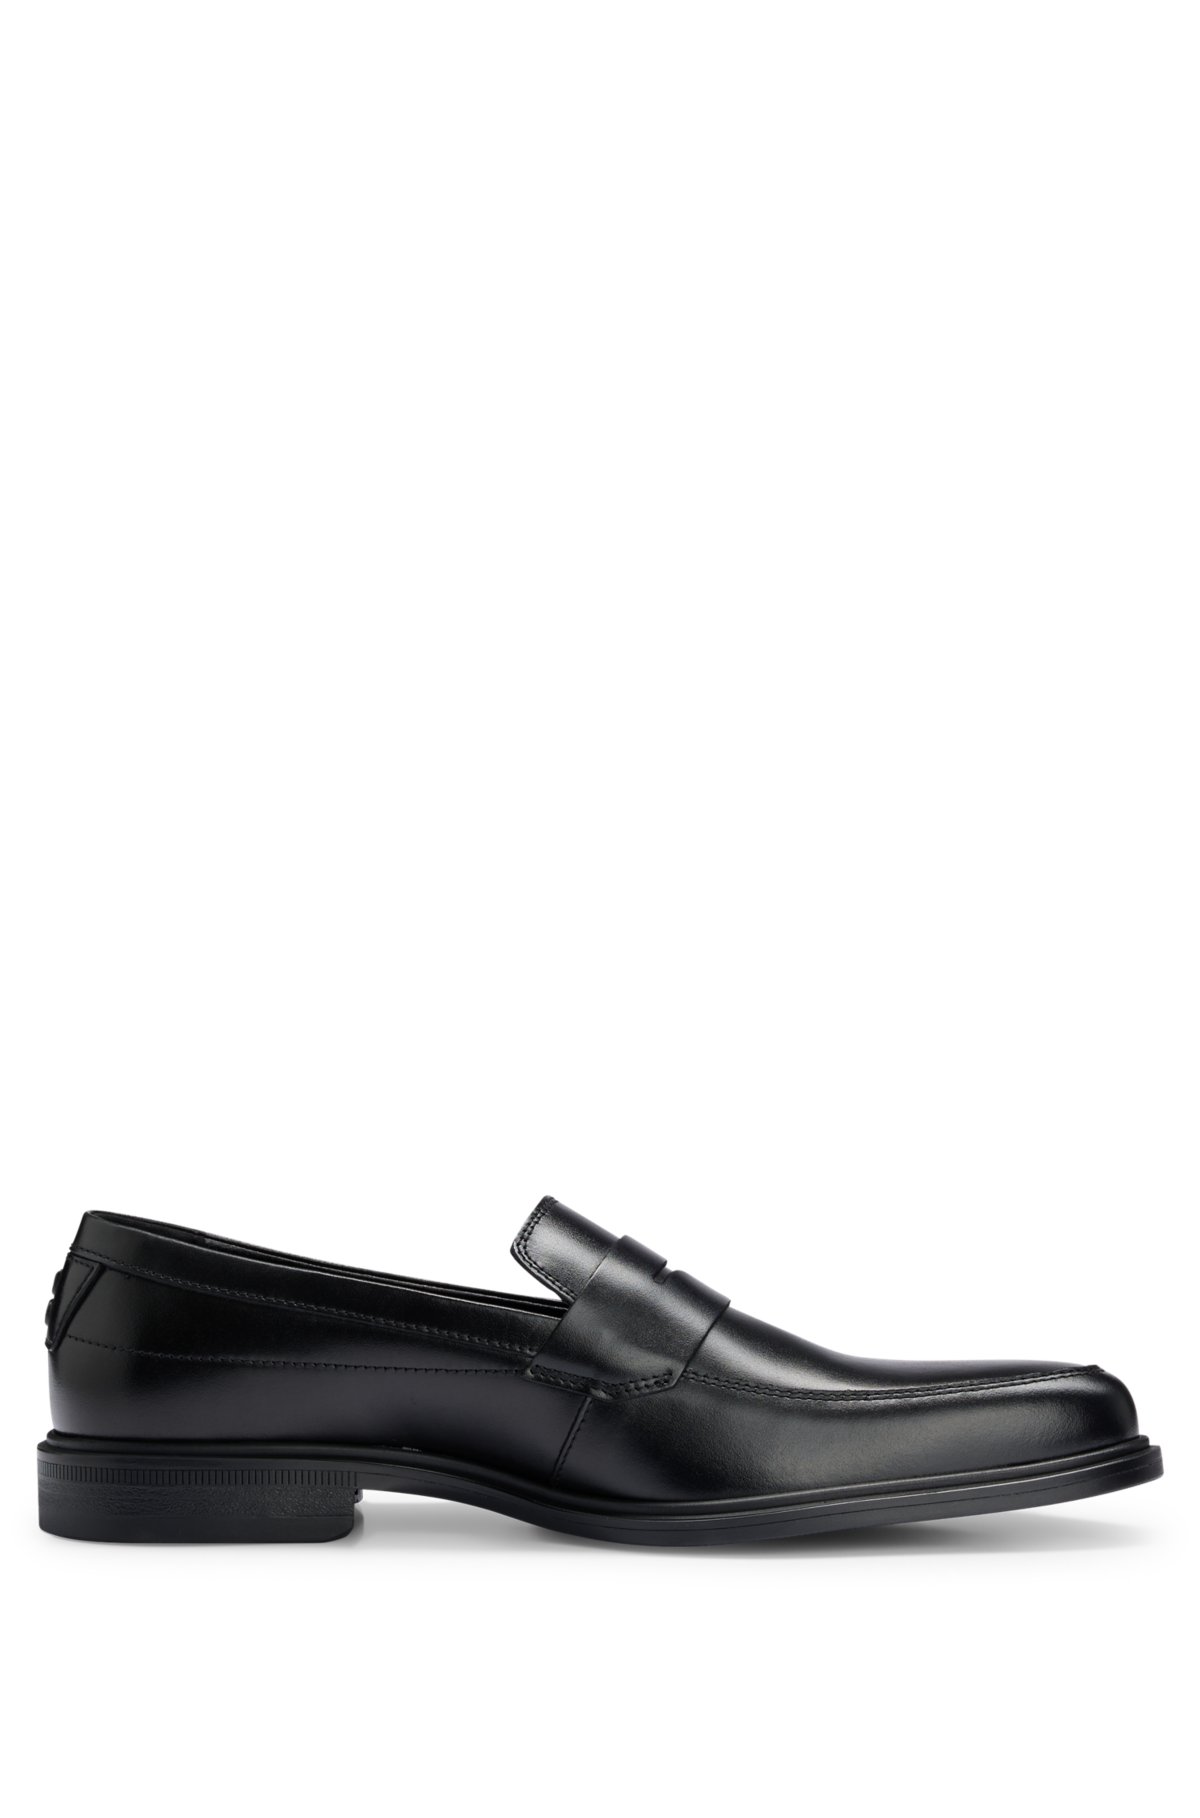 HUGO - Leather loafers with penny trim and rubber sole